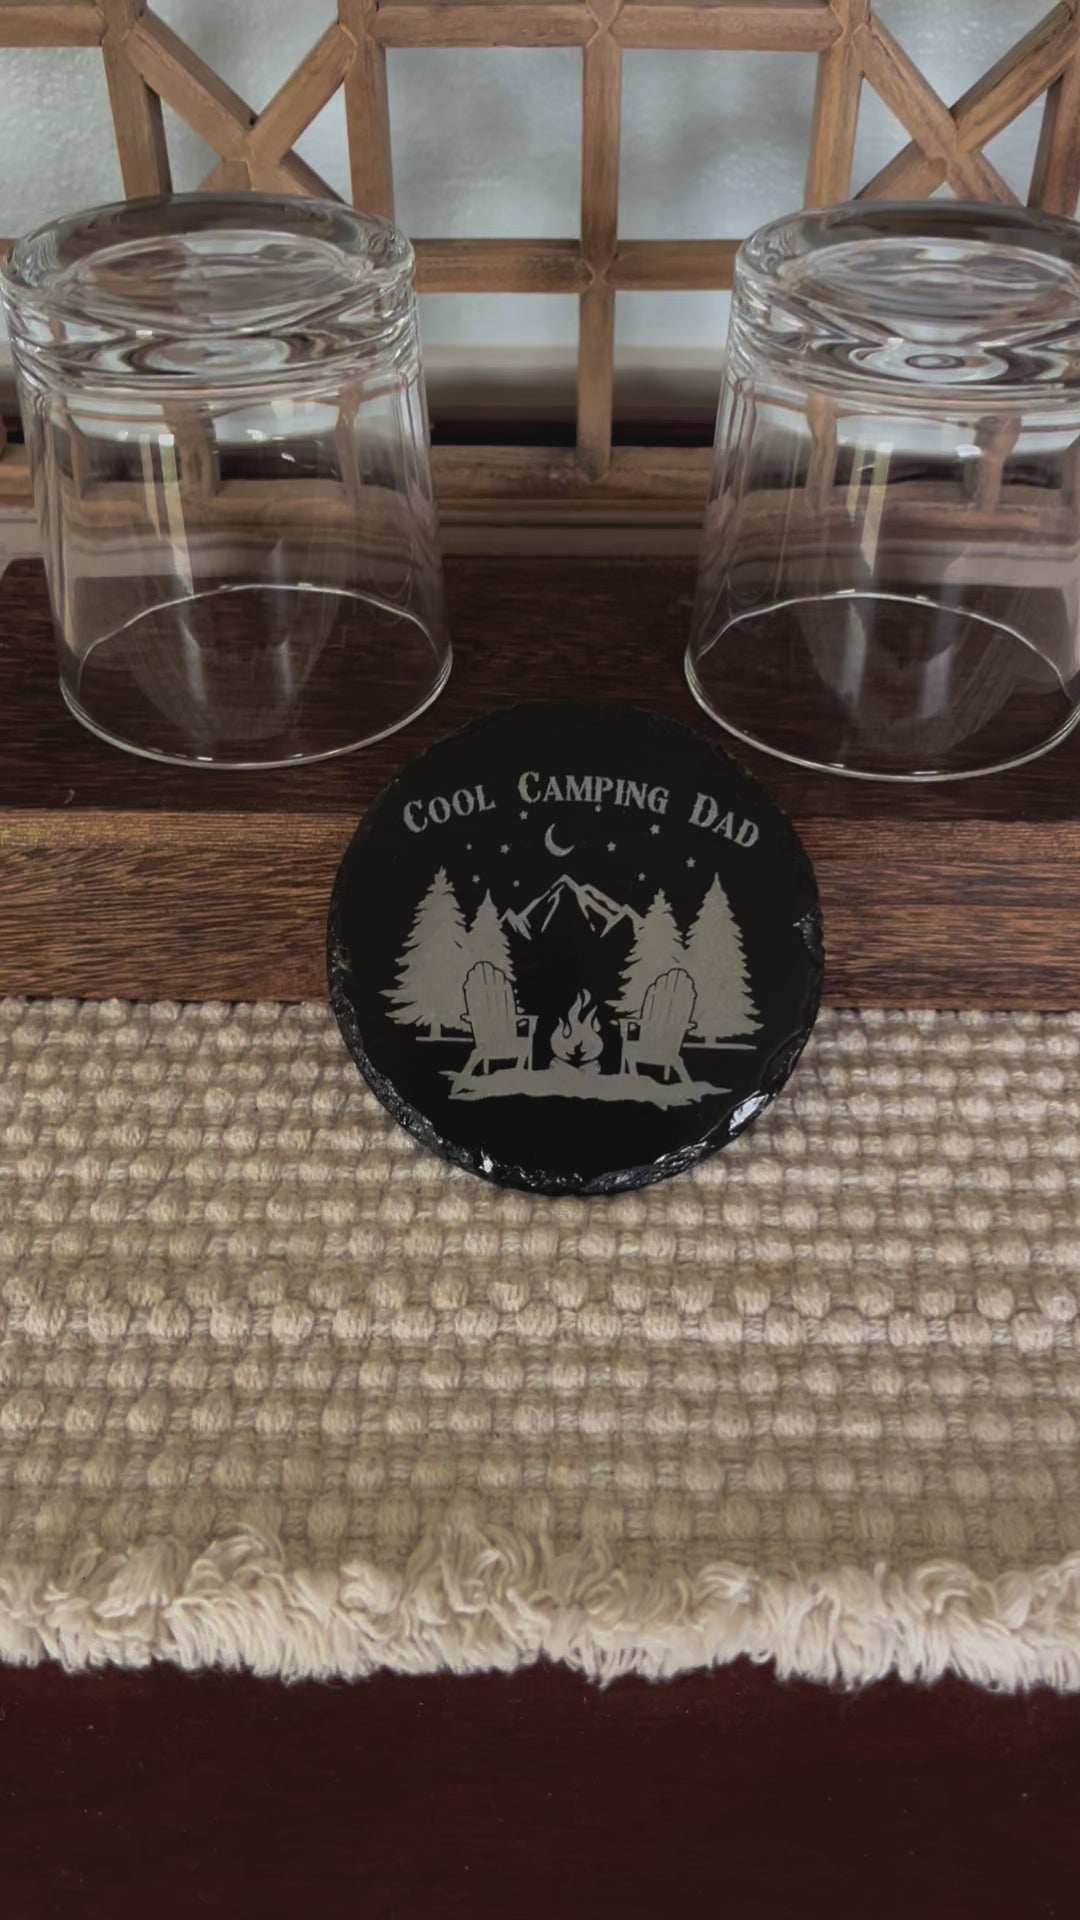 Unique Gift for Camping Dads: Laser Engraved Slate Coasters